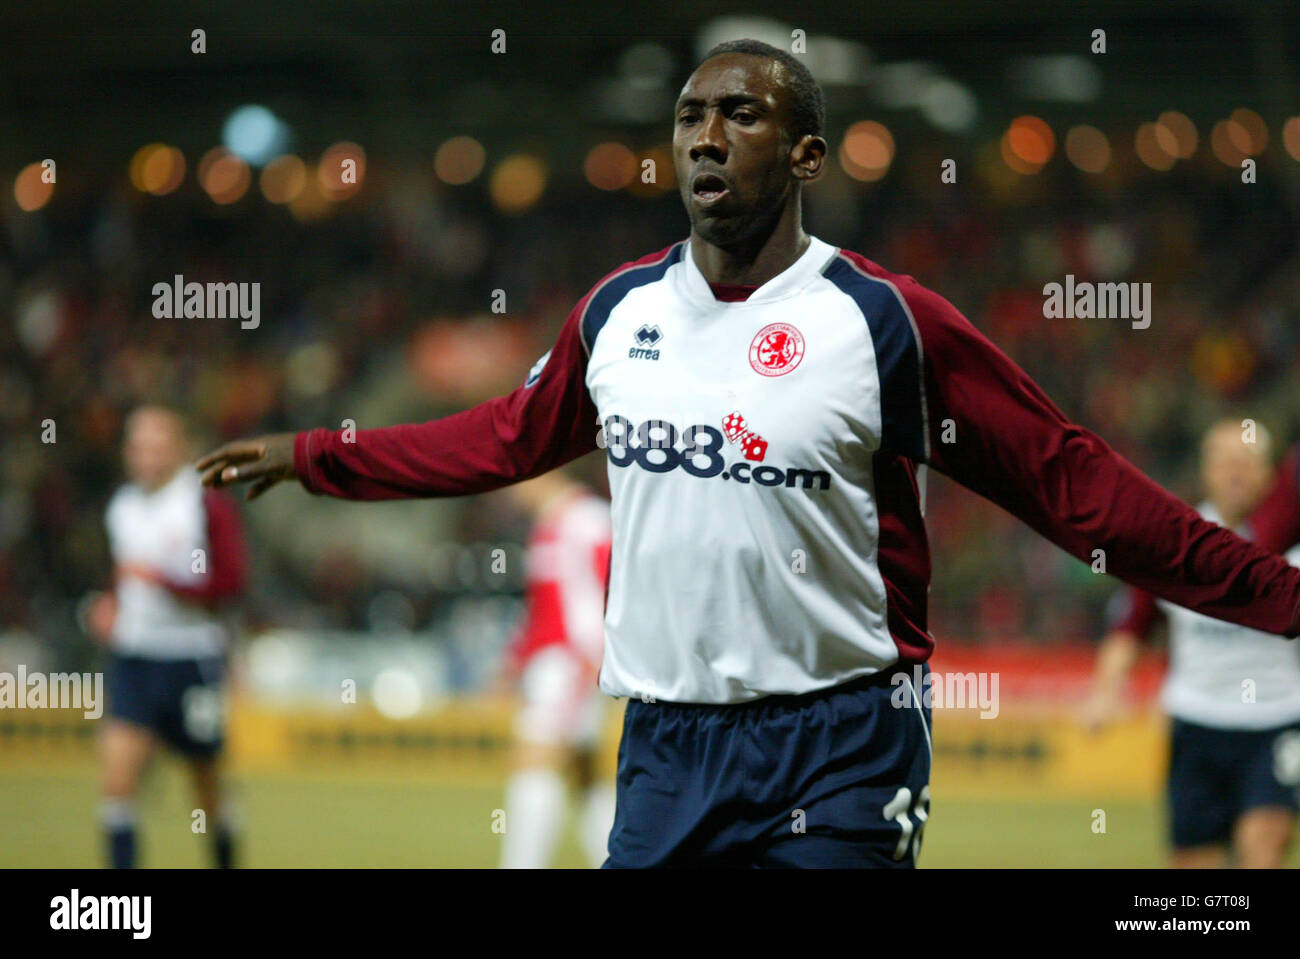 Middlesbrough's Jimmy Floyd Hasselbaink celebrates scoring the second goal against Grazer AK Stock Photo